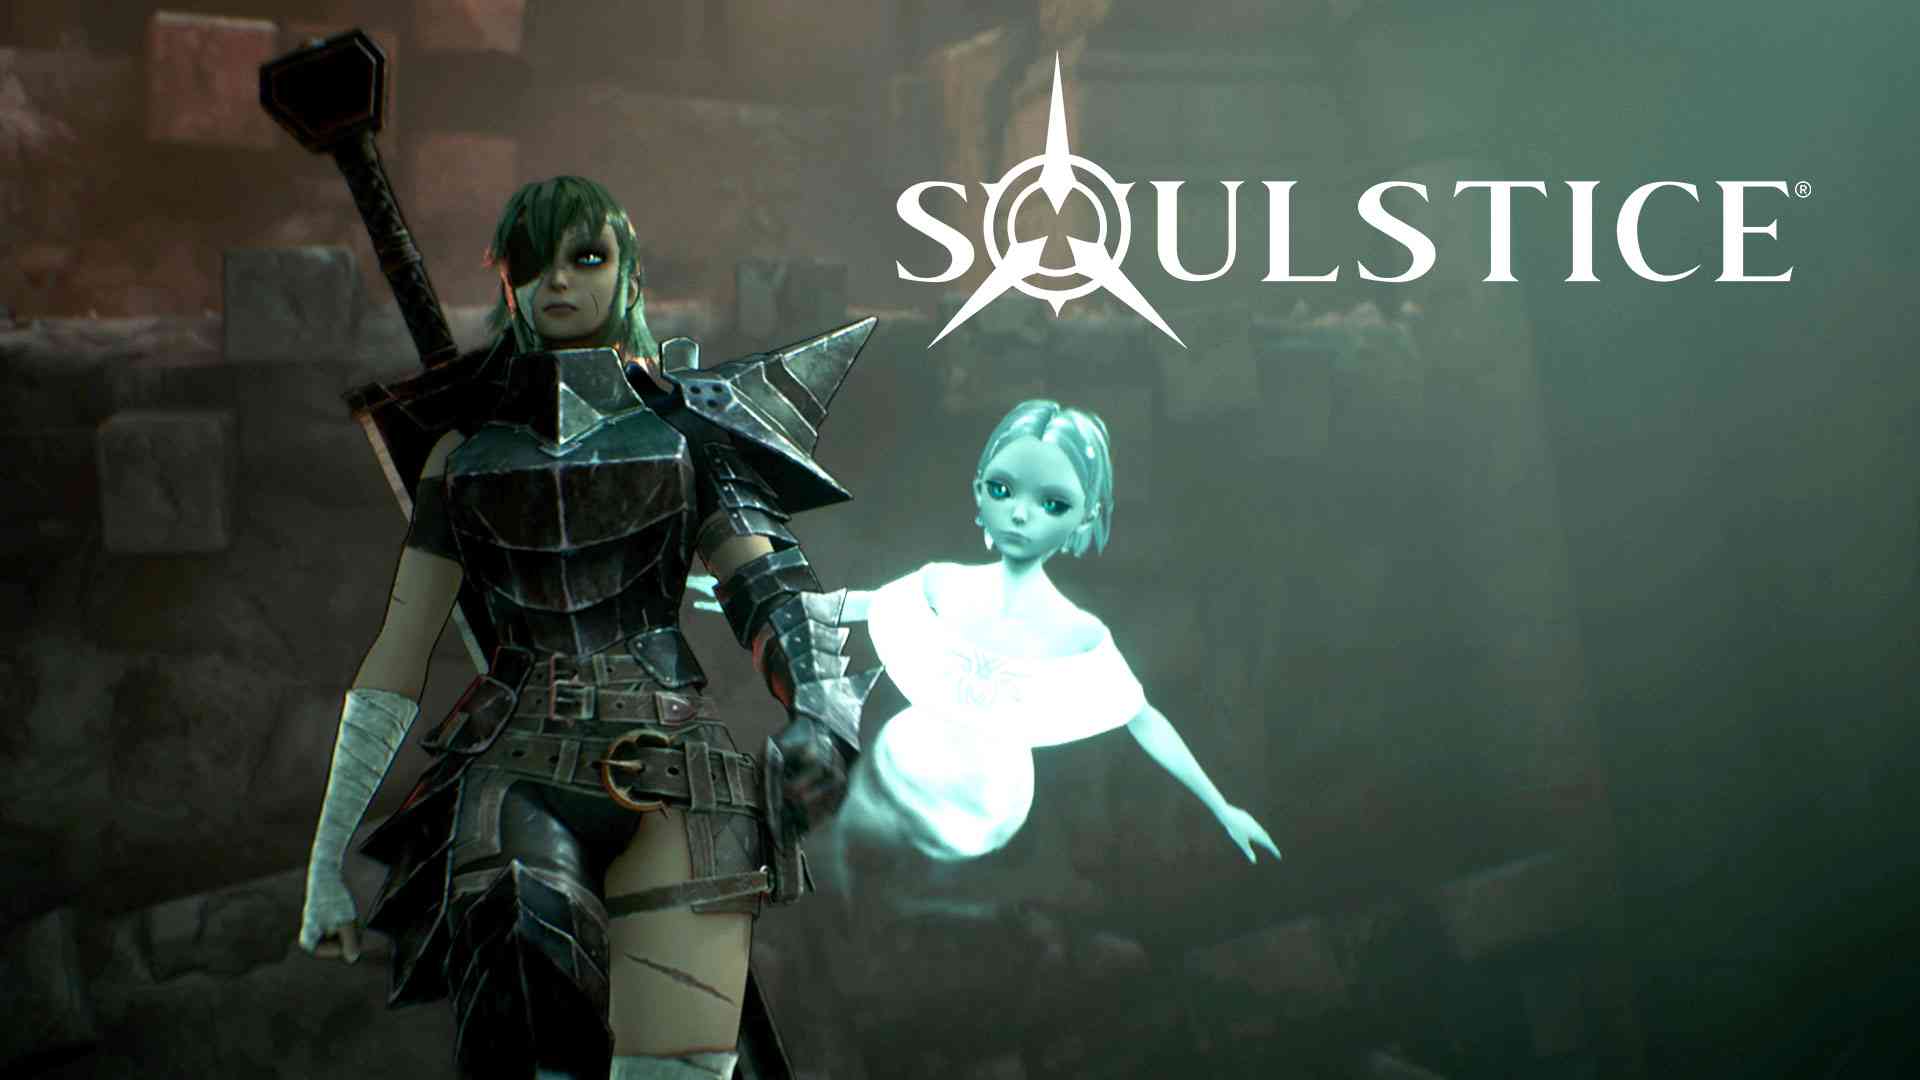 PlayStation 5] Soulstice Review